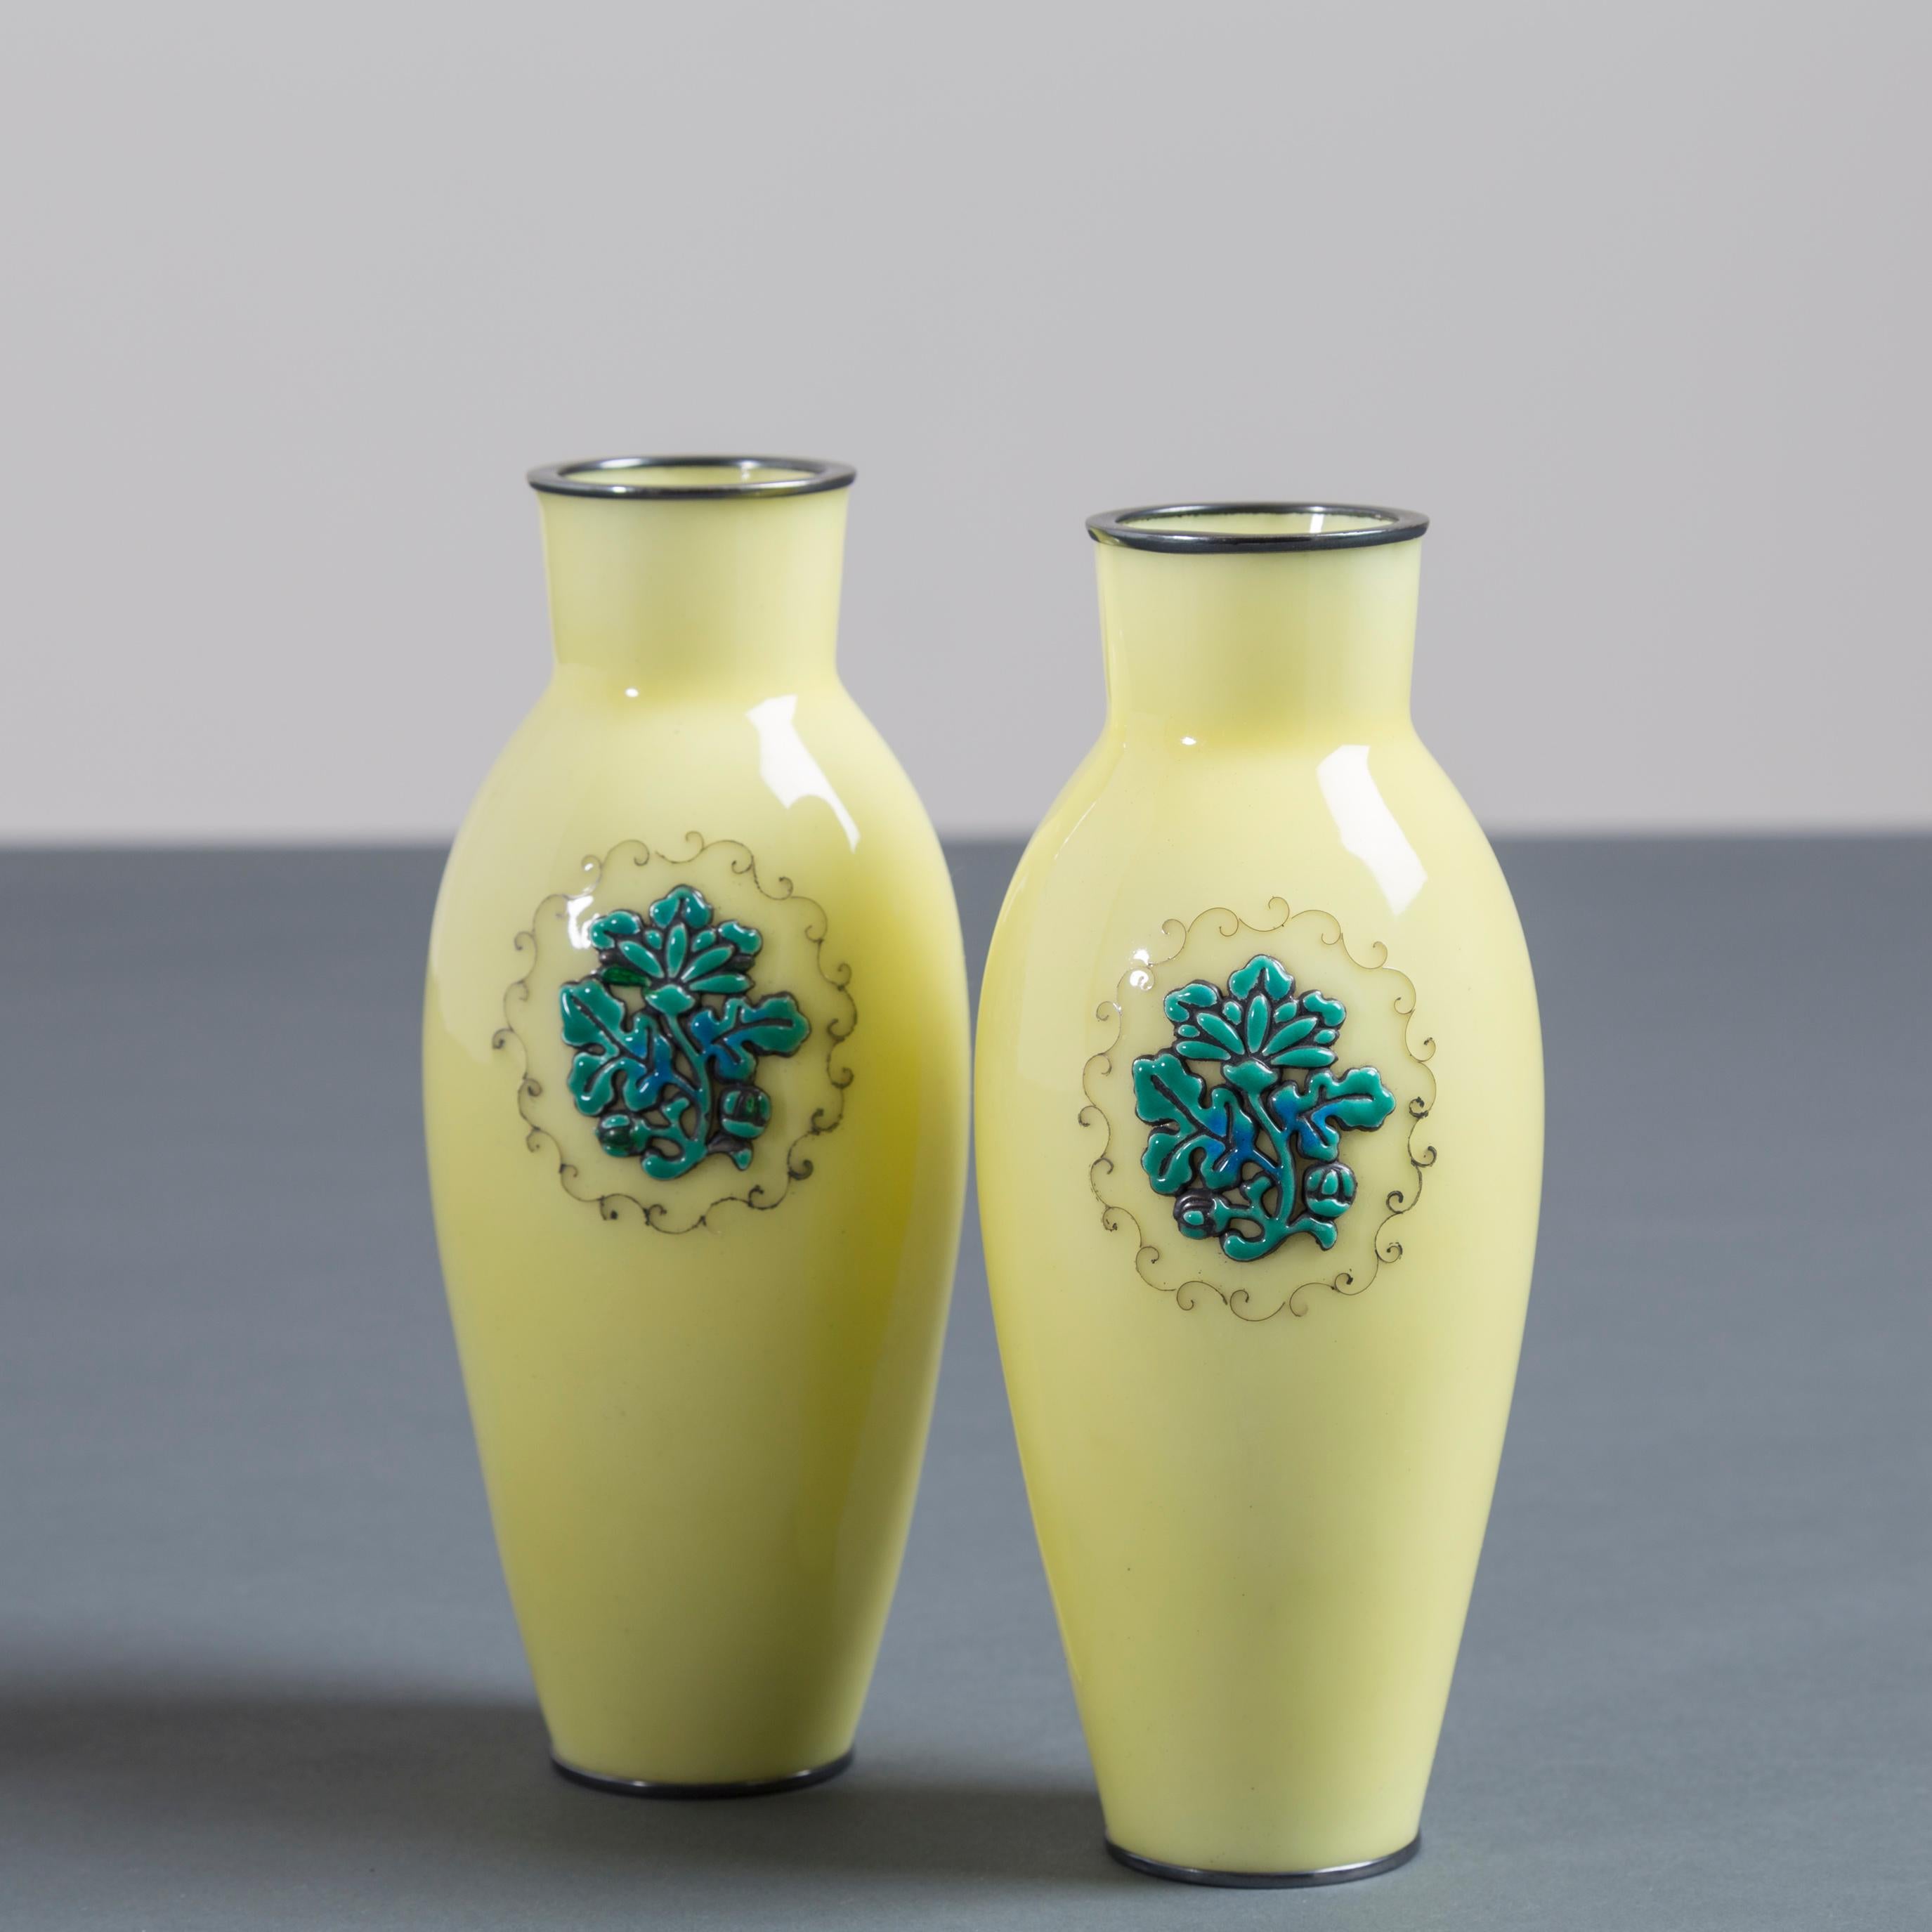 Early 20th Century Pair of Japanese Cloisonné Yellow Enamel Vases by Ando, circa 1920 For Sale